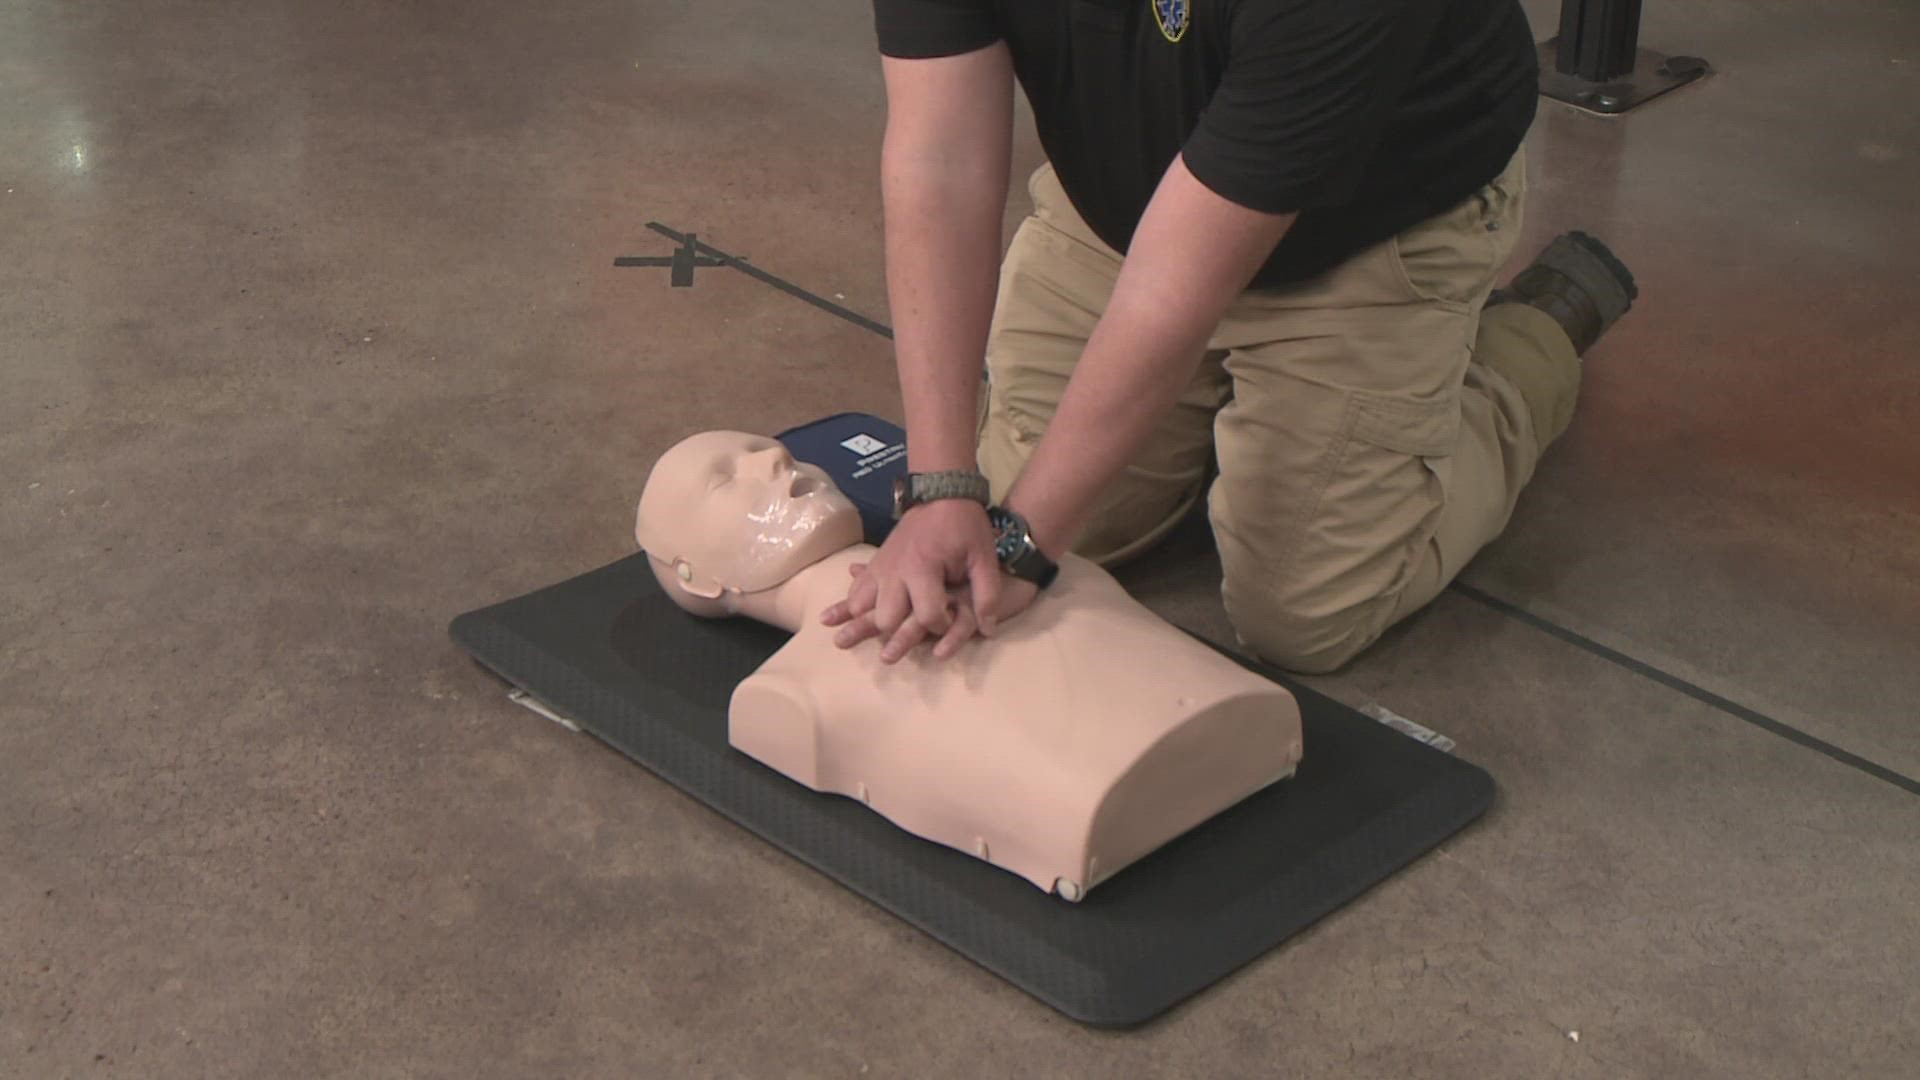 CPR Chest Compressions: Techniques for Effective Lifesaving